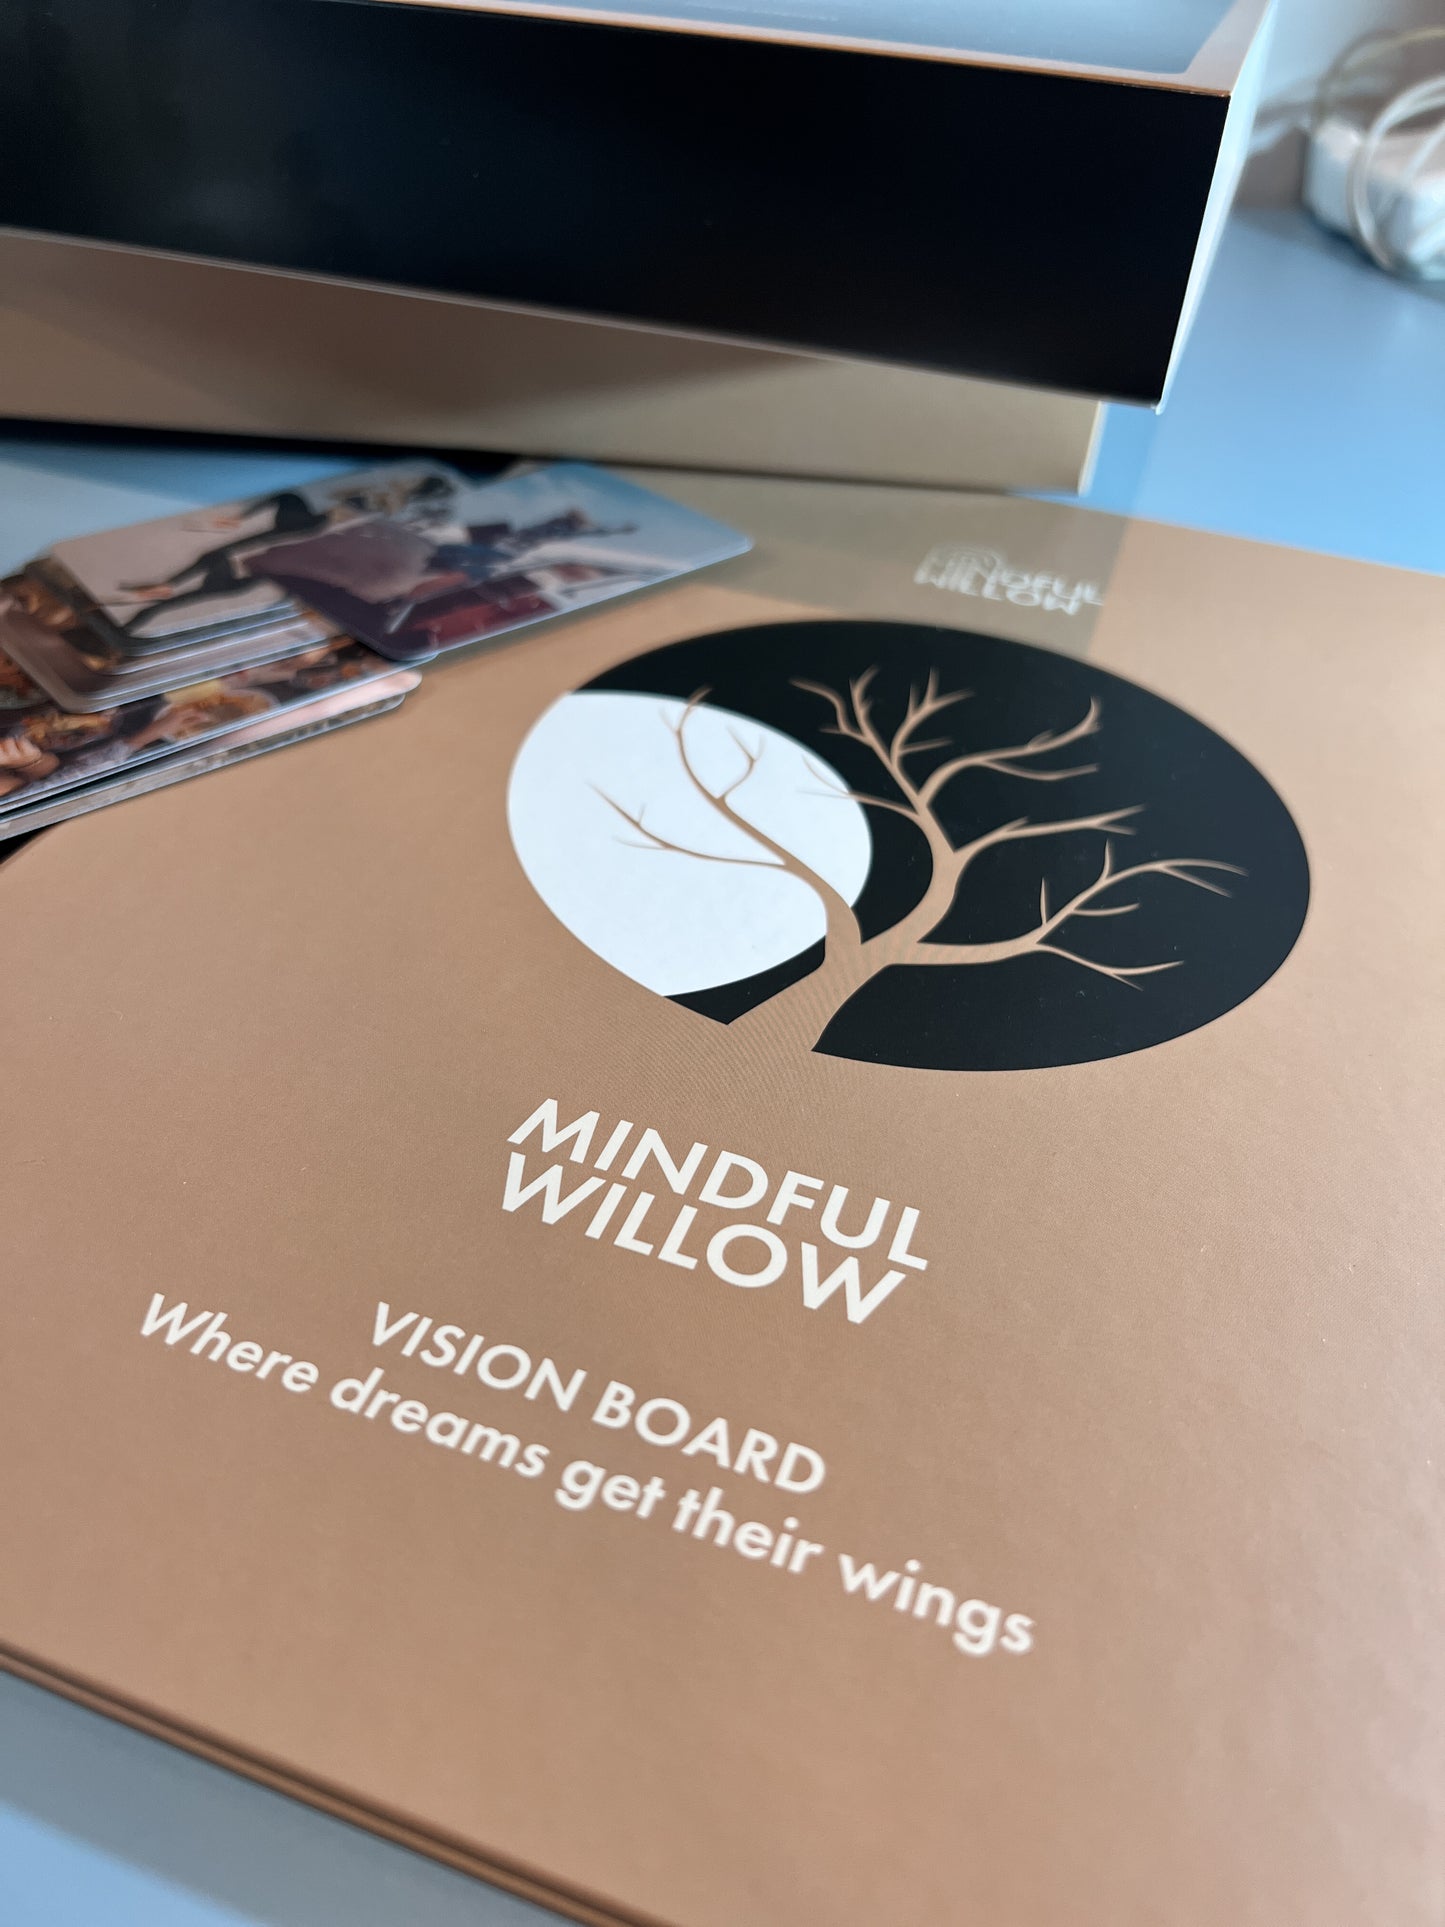 Mindful Willow Vision Board Kit